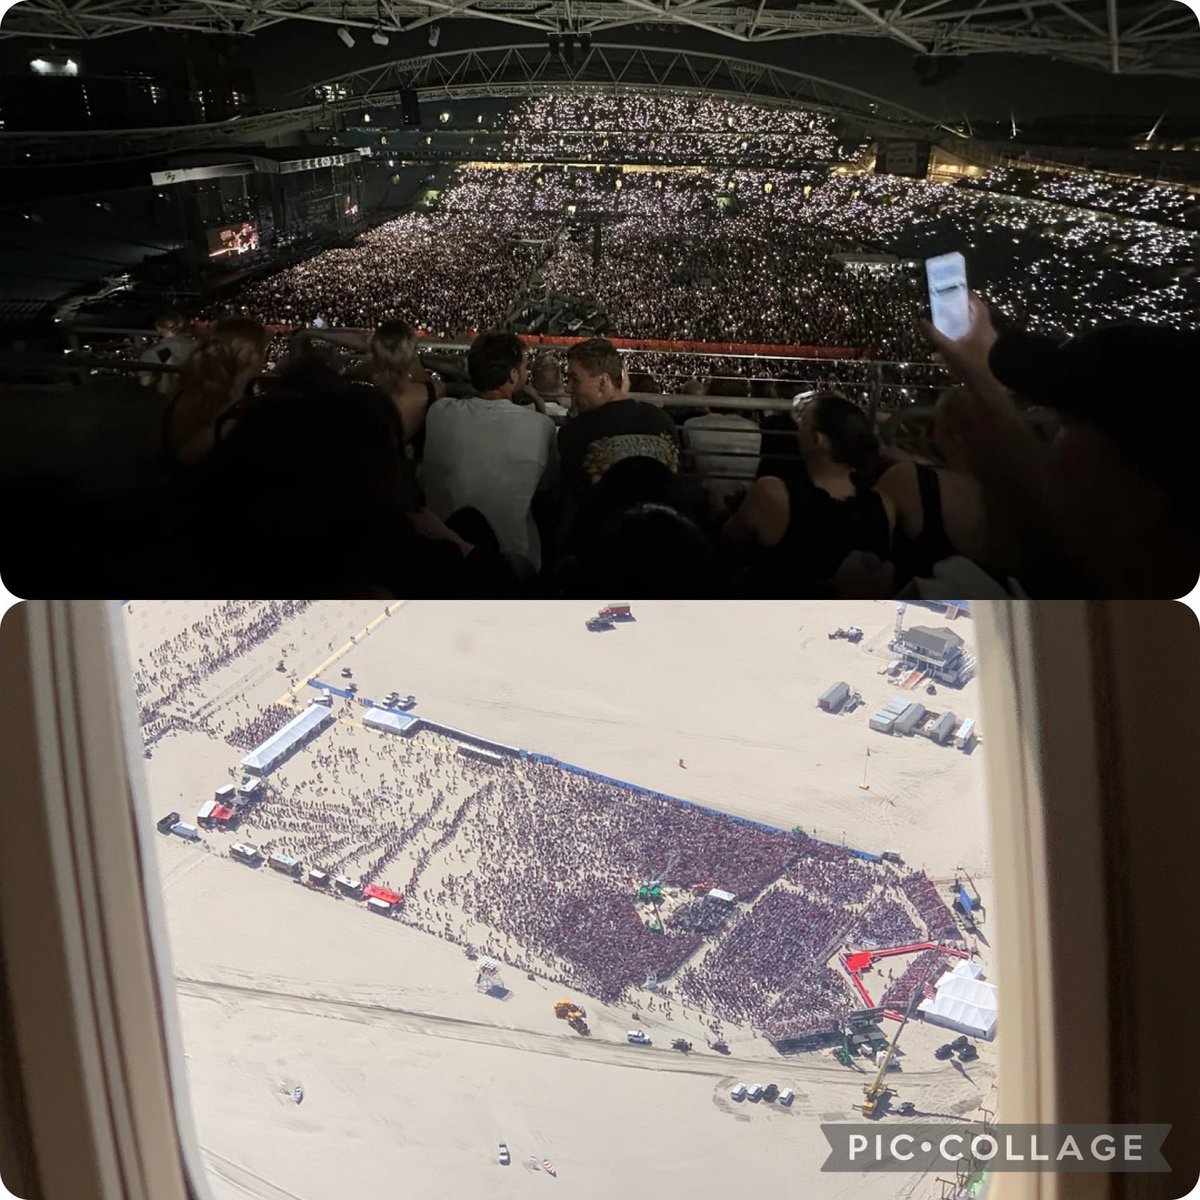 @DefiyantlyFree It’s not a melt down. The rally had maybe 5,000 people. So let’s look at what a 100,000 people actually look like Two comparisons 100,000 people at an Obama speech. 96,000 people at a Taylor Swift concert in the largest Olympic stadium in the world. You see the size…